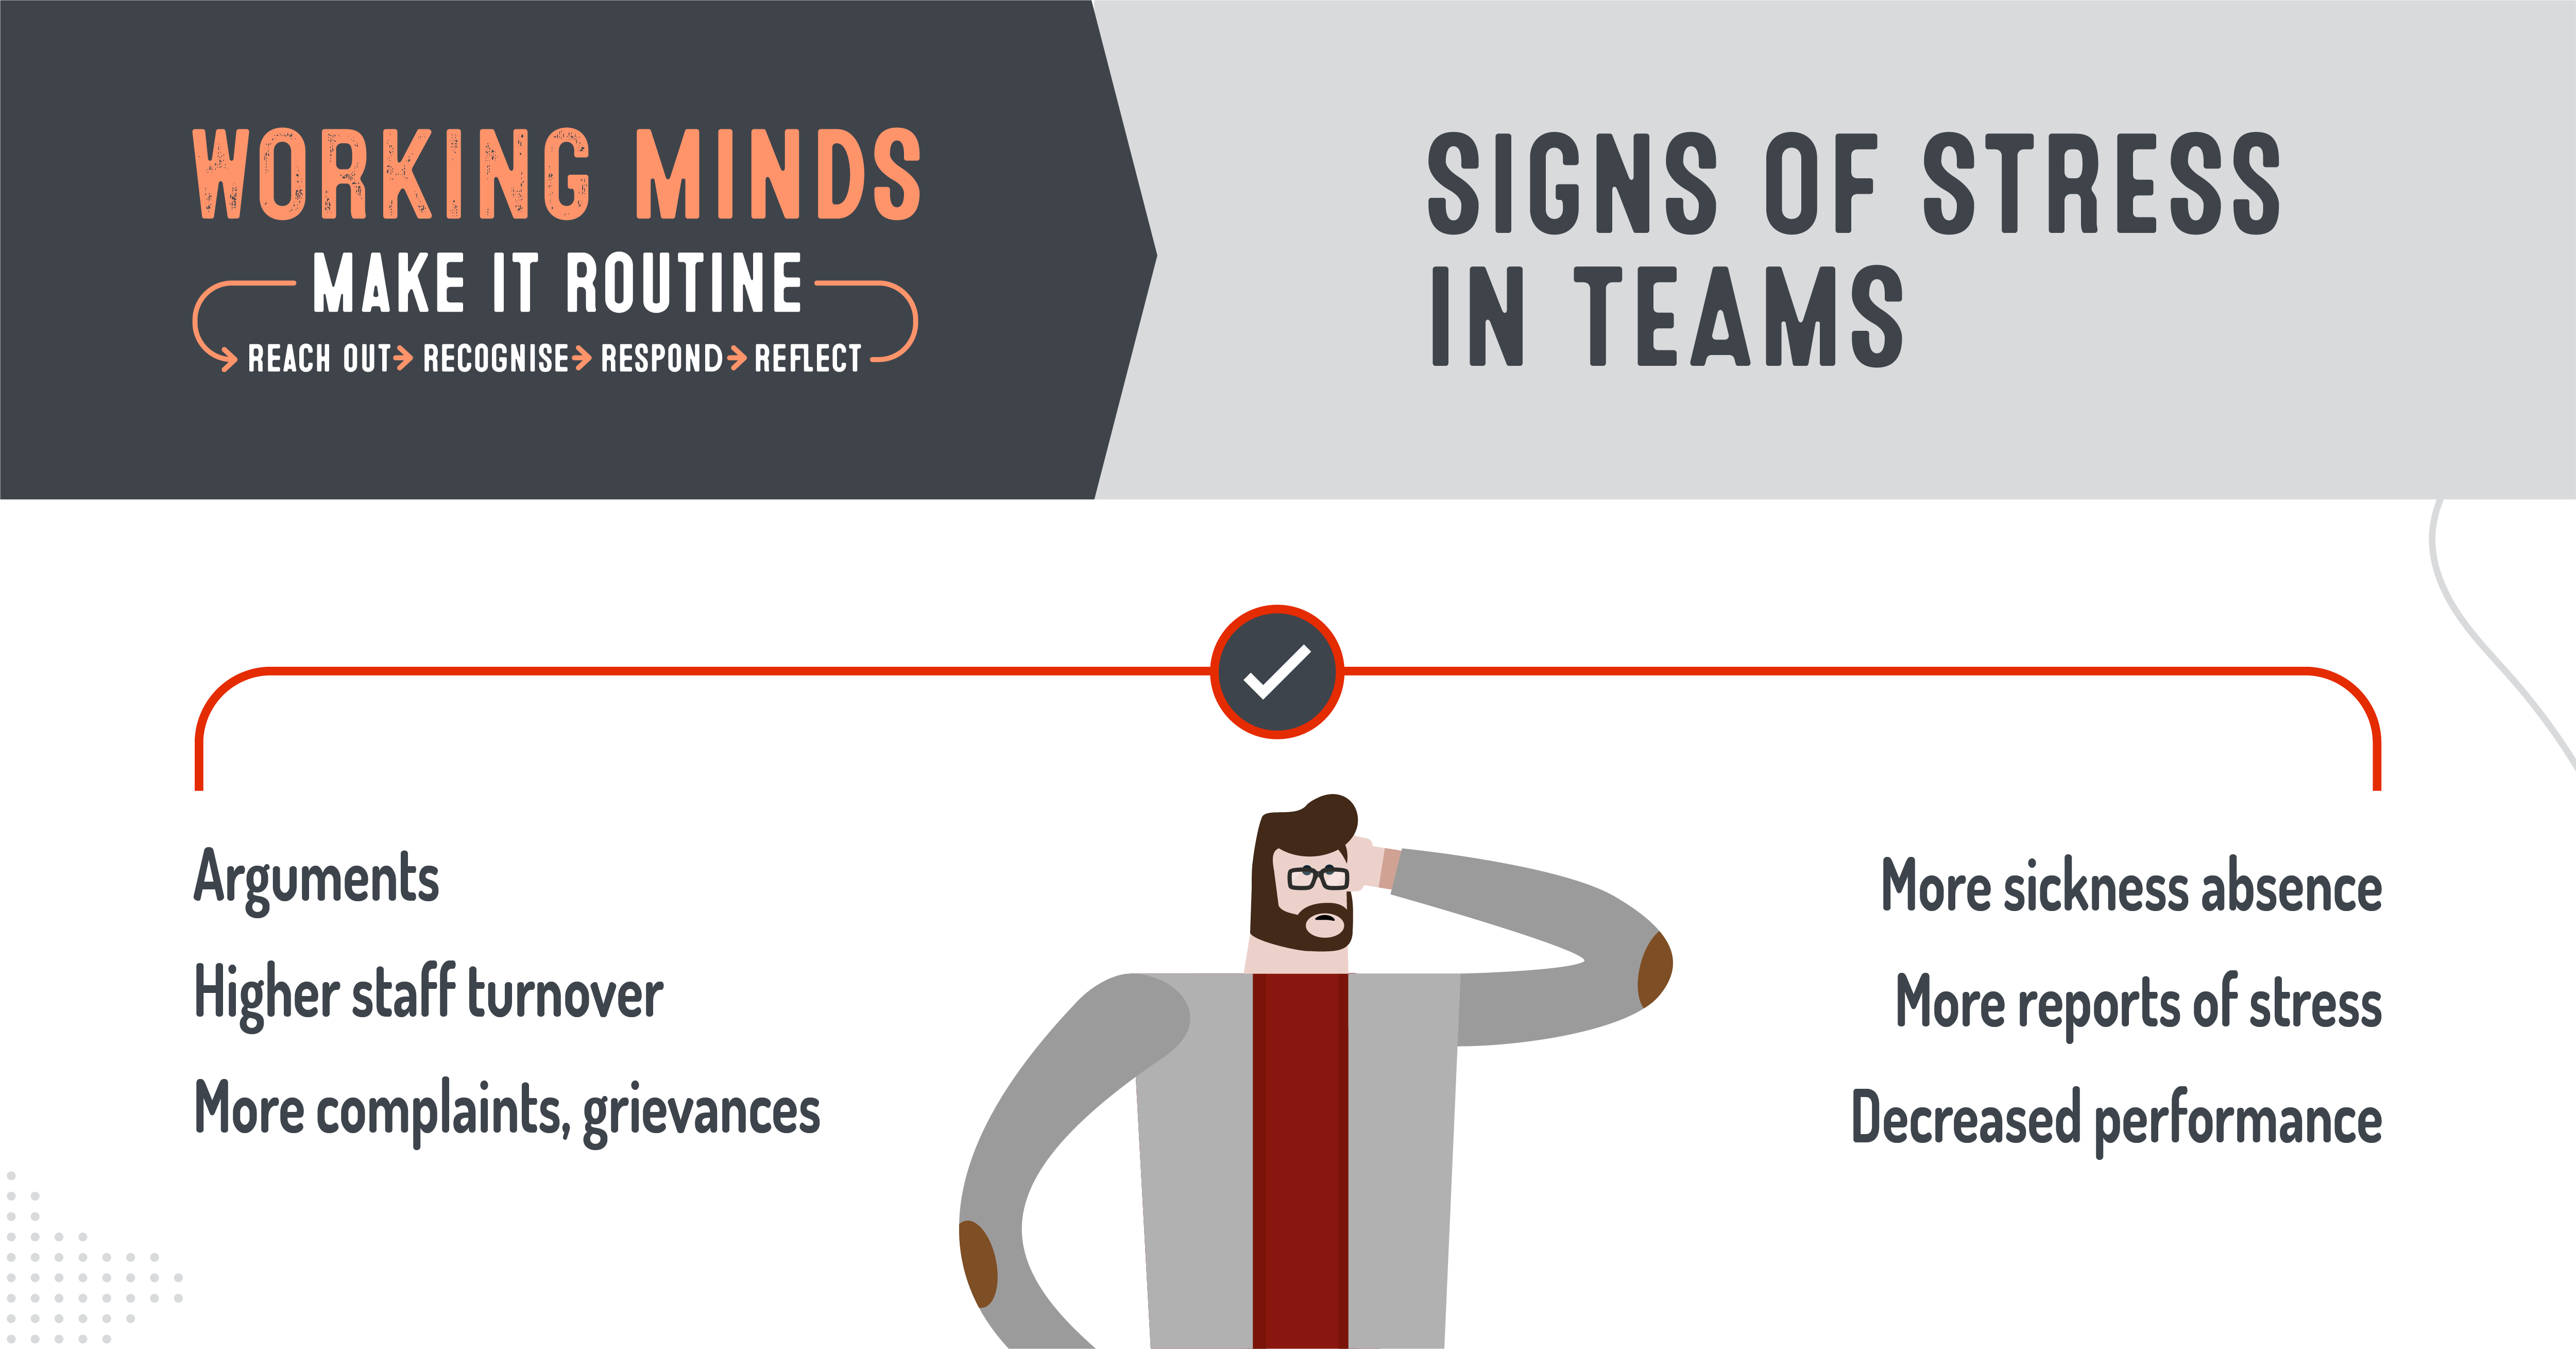 Signs of stress in teams; Arguments, Higher staff turnover